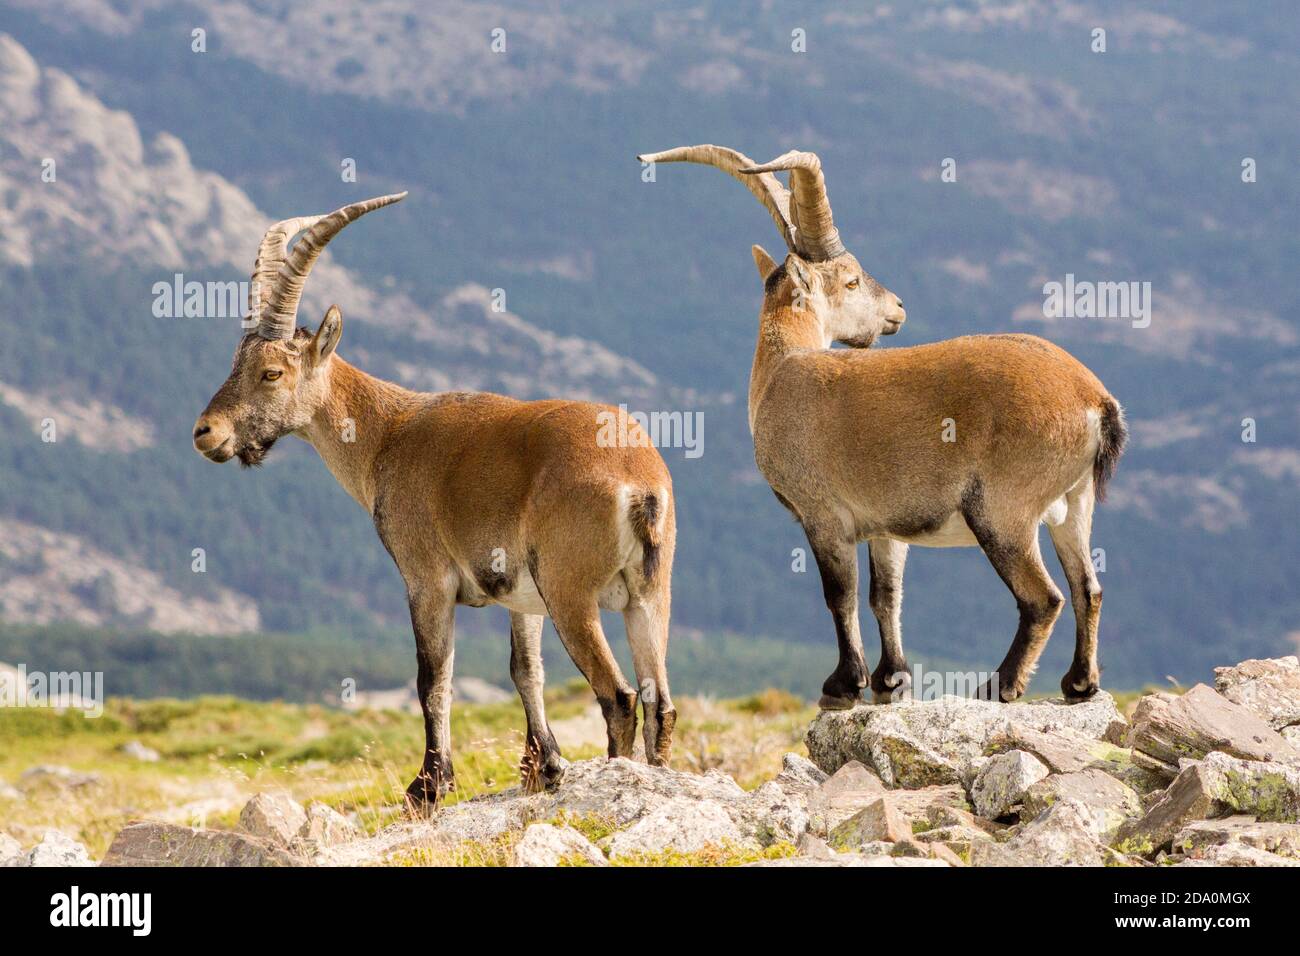 P.N. de Guadarrama, Madrid, Spain. Two  male wild mountain goats in summer with valley in the background. Stock Photo